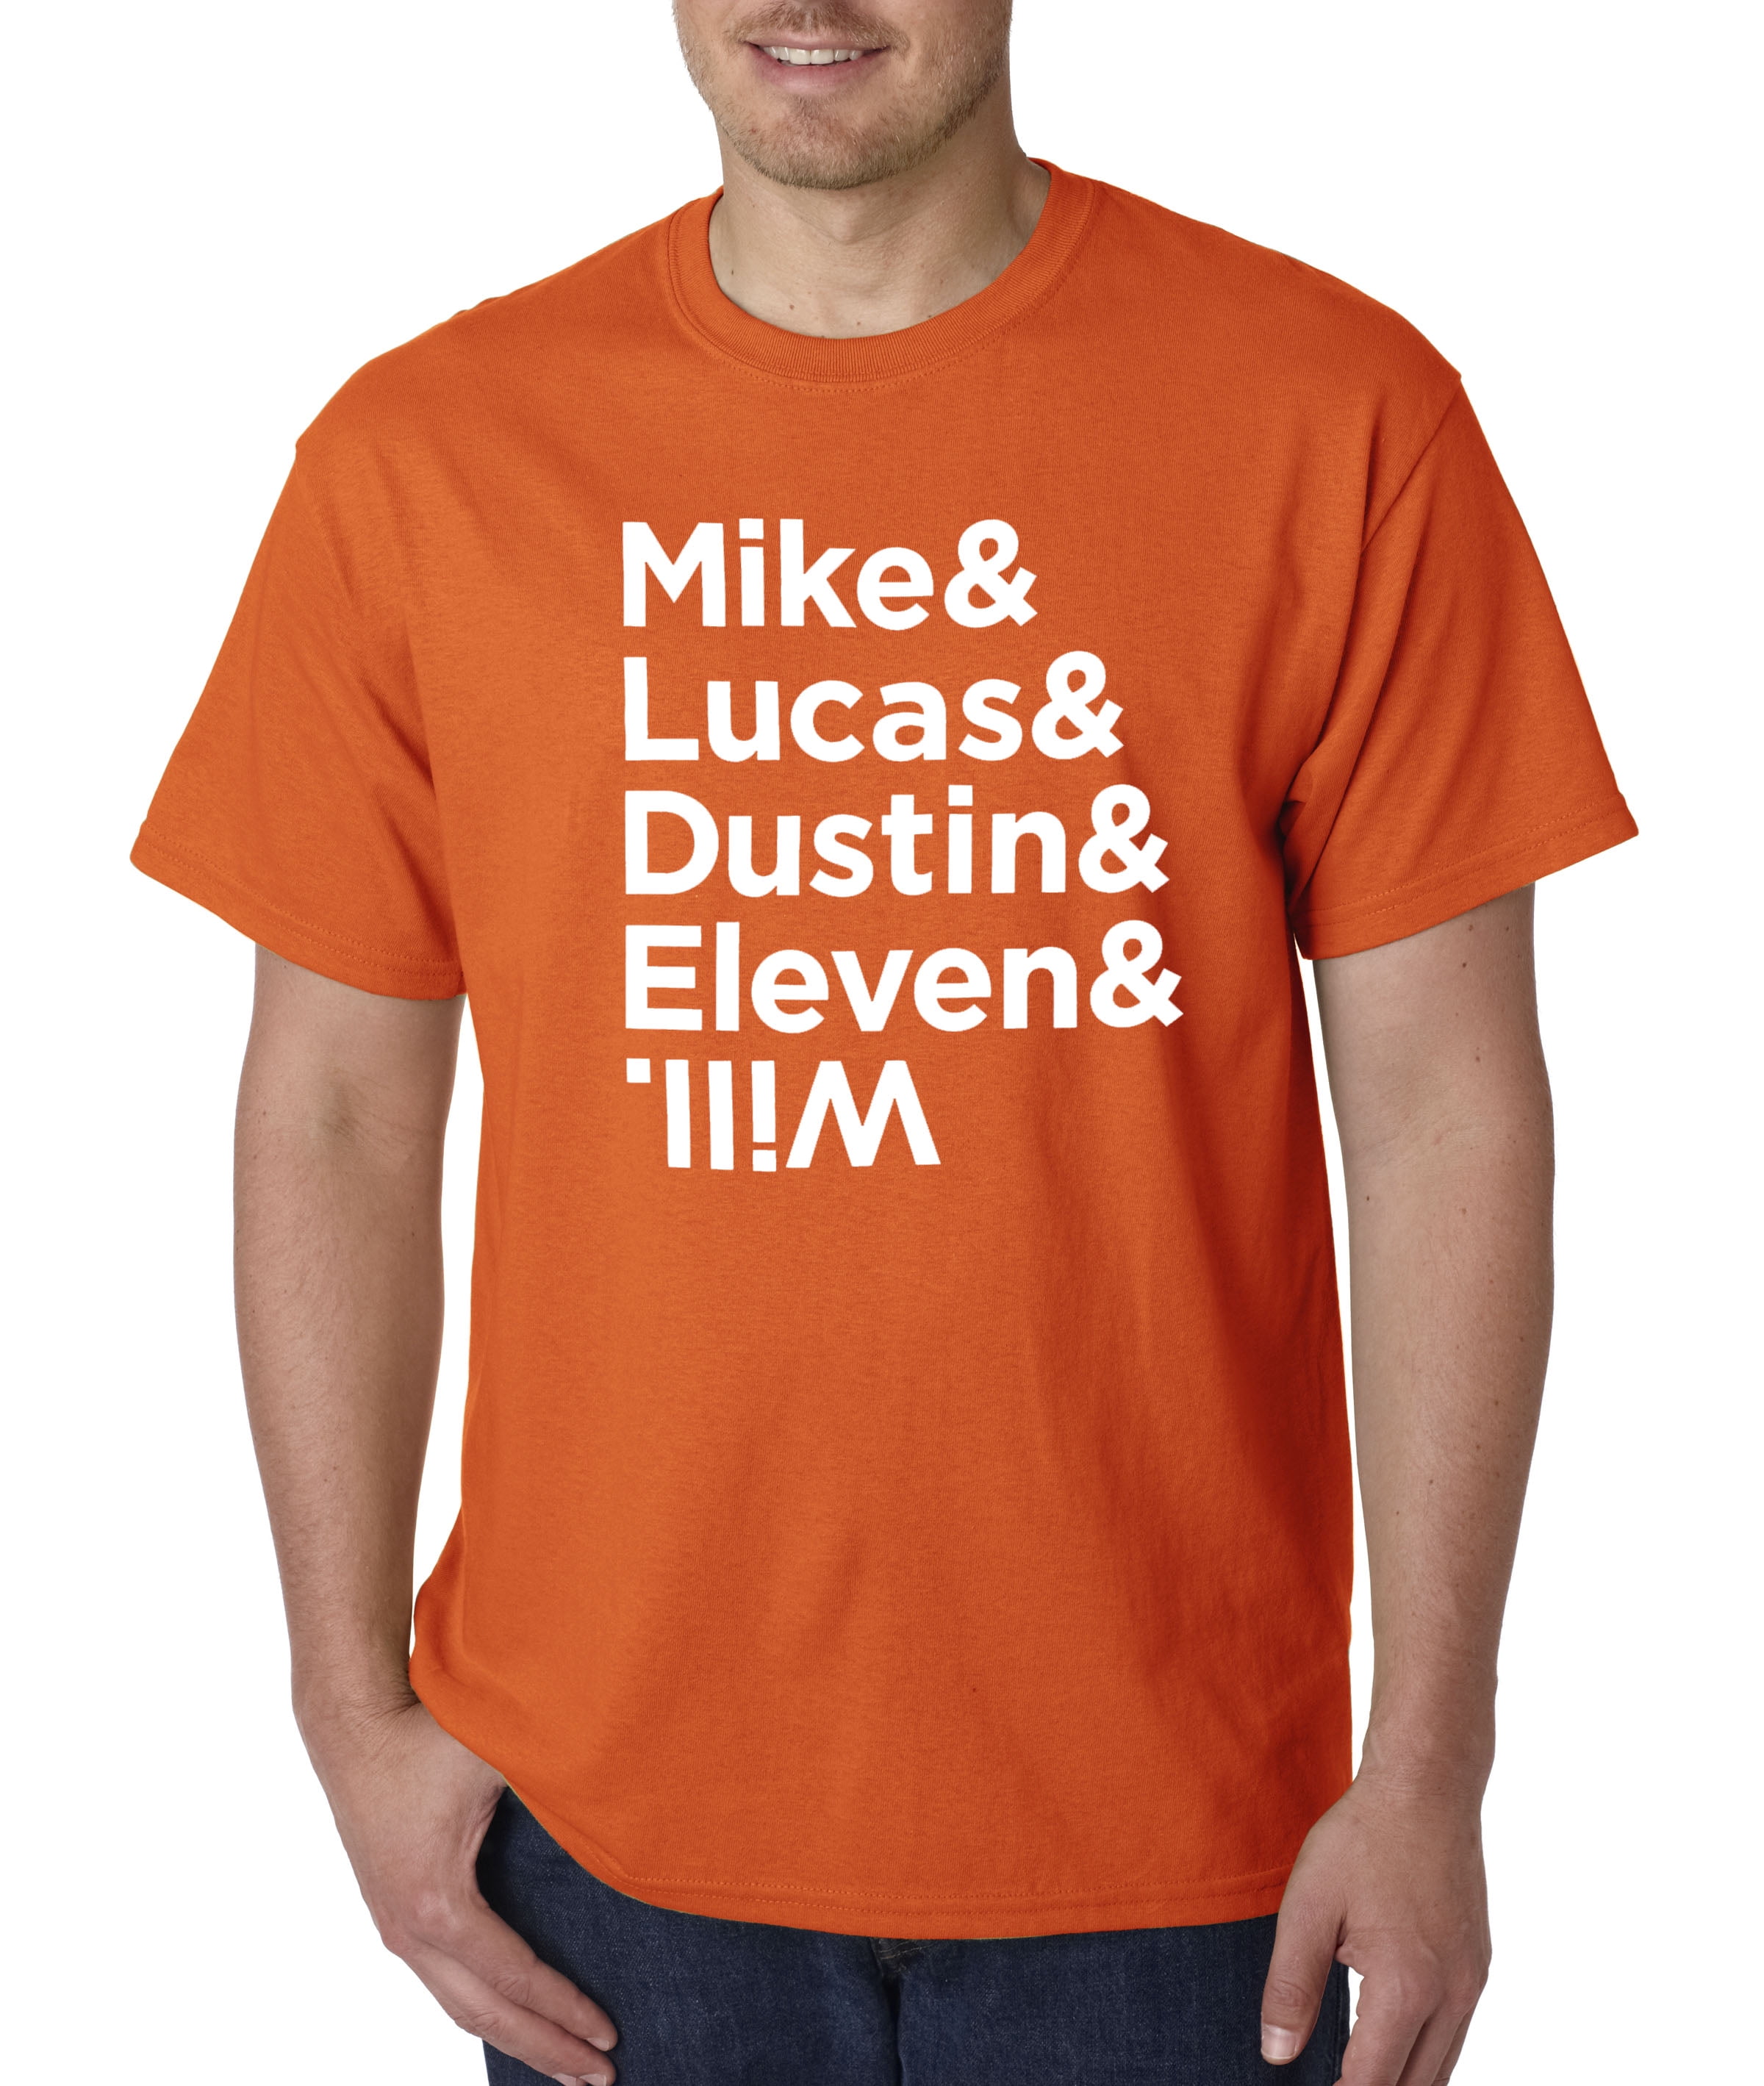 New Way 853 Unisex T Shirt Mike Lucas Dustin Eleven Will